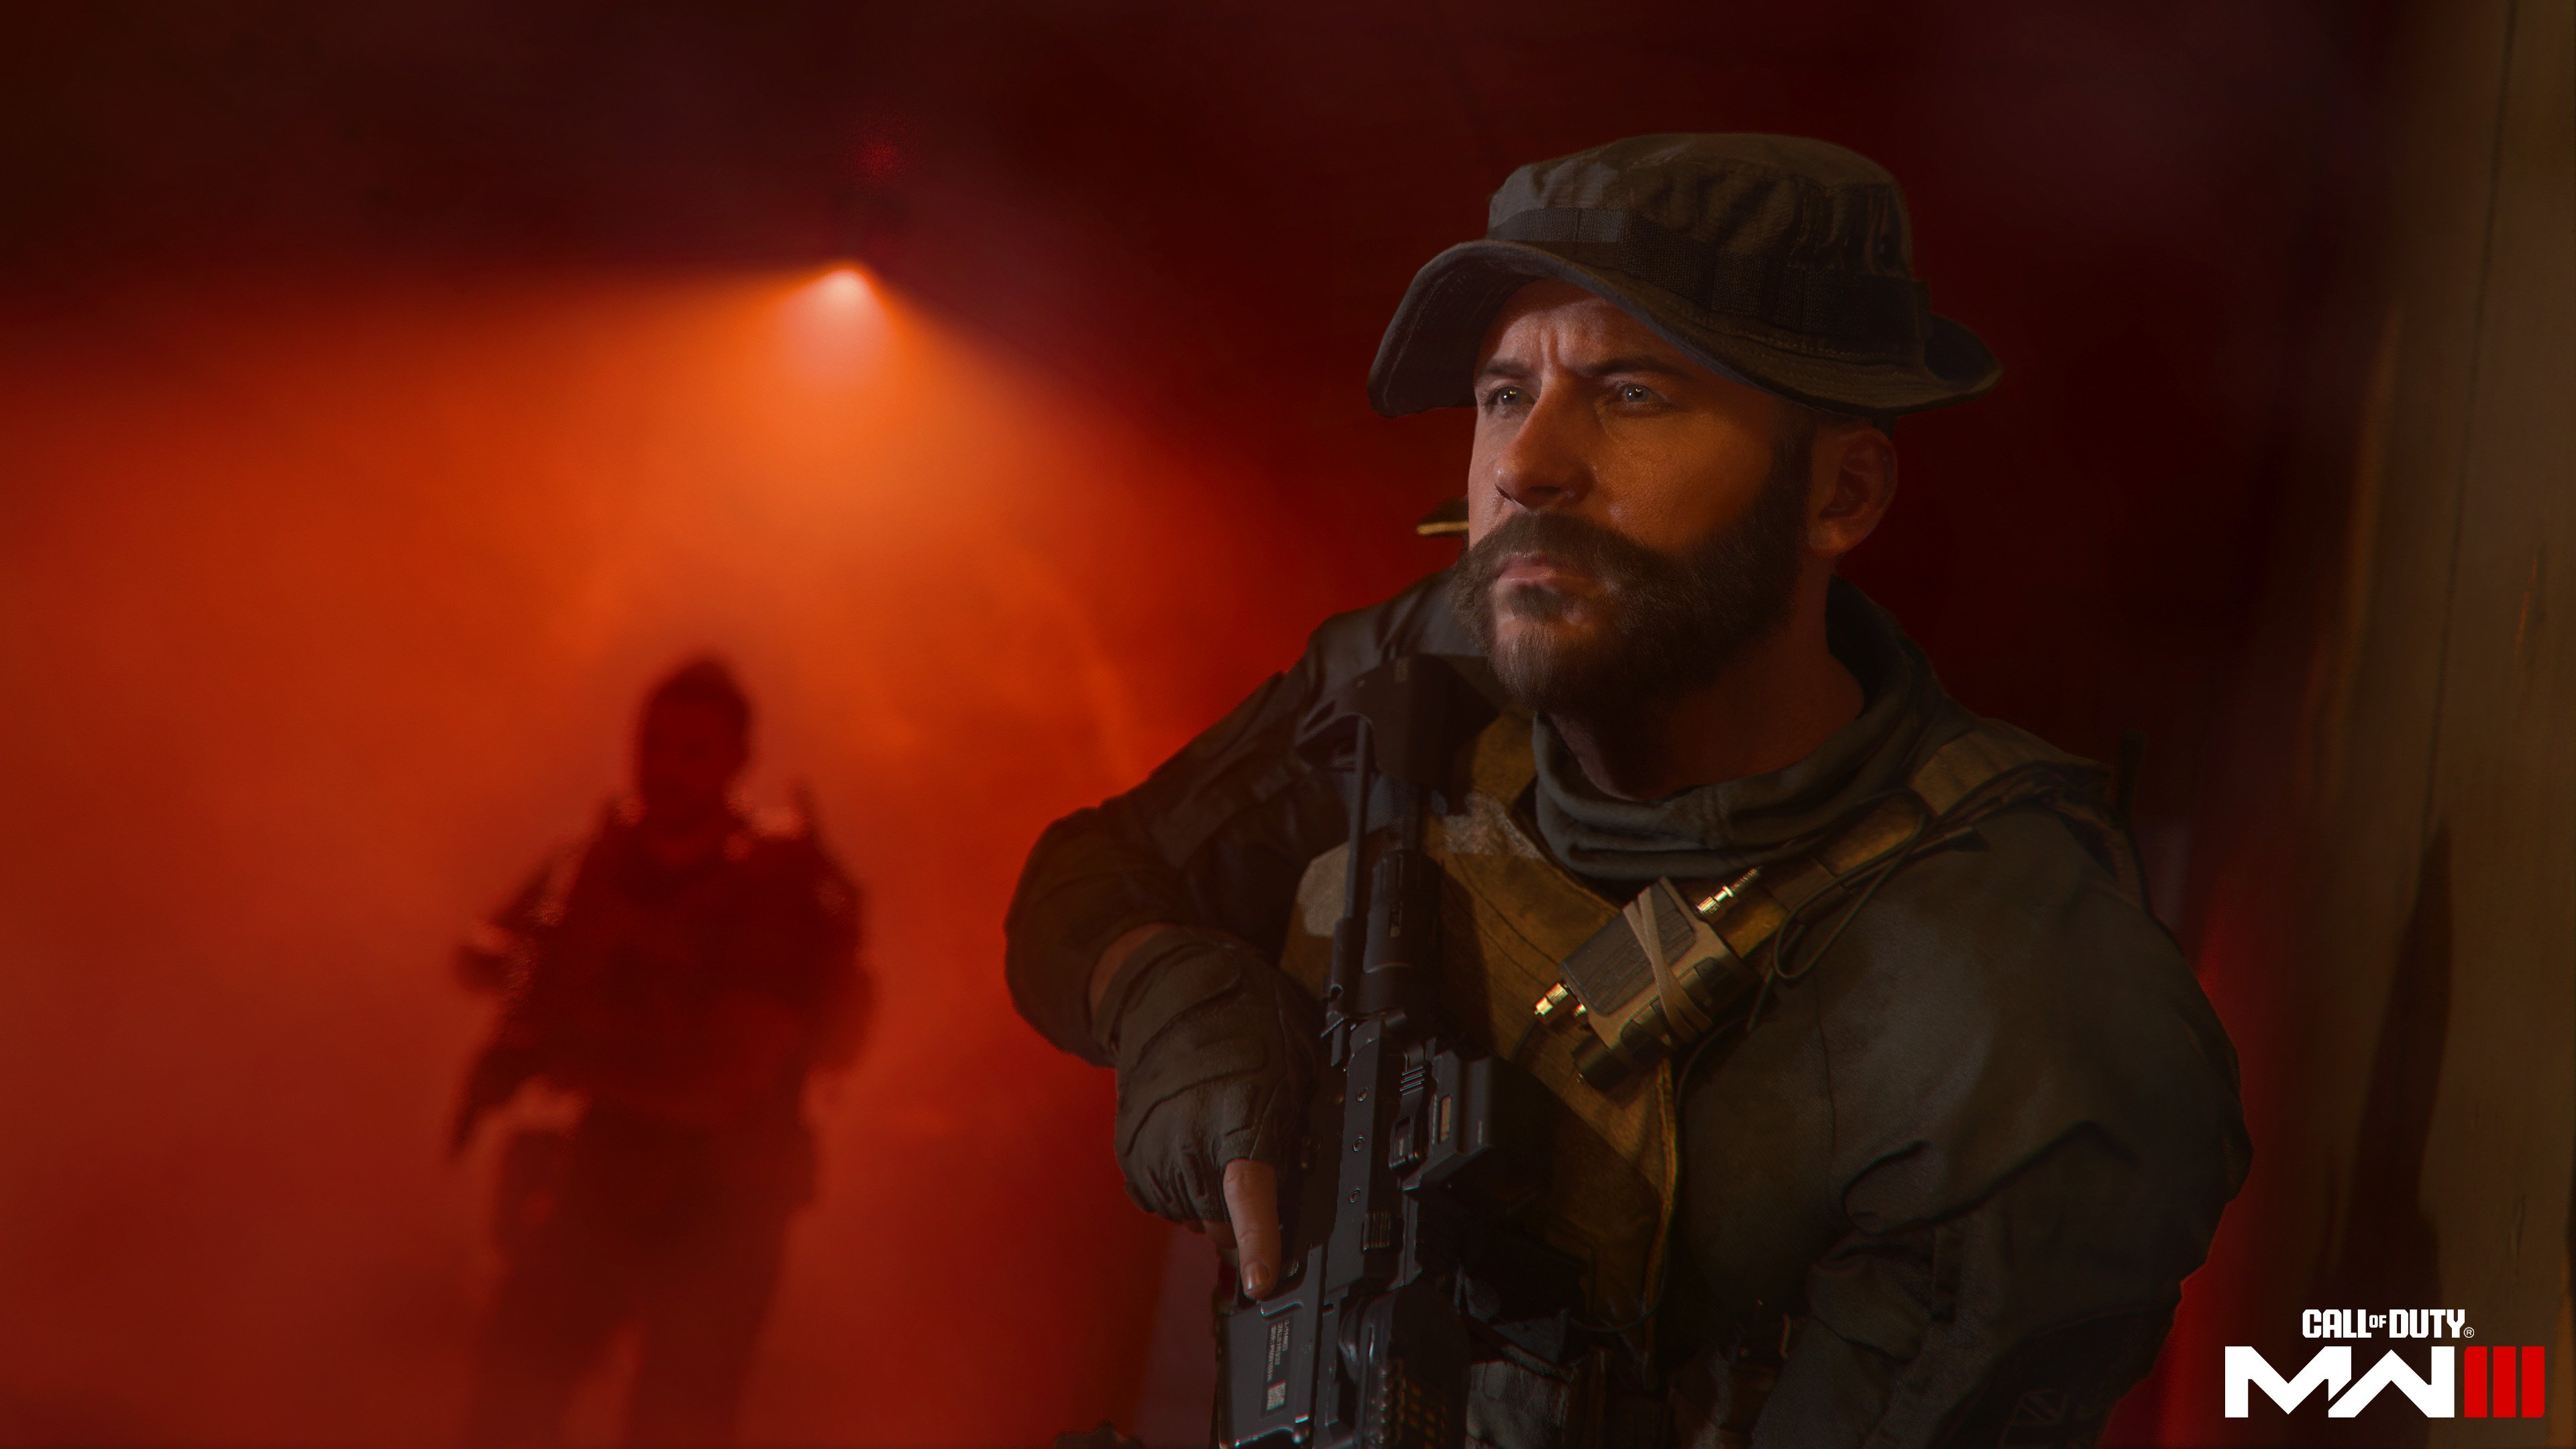 Call of Duty Captain Price DLC revealed